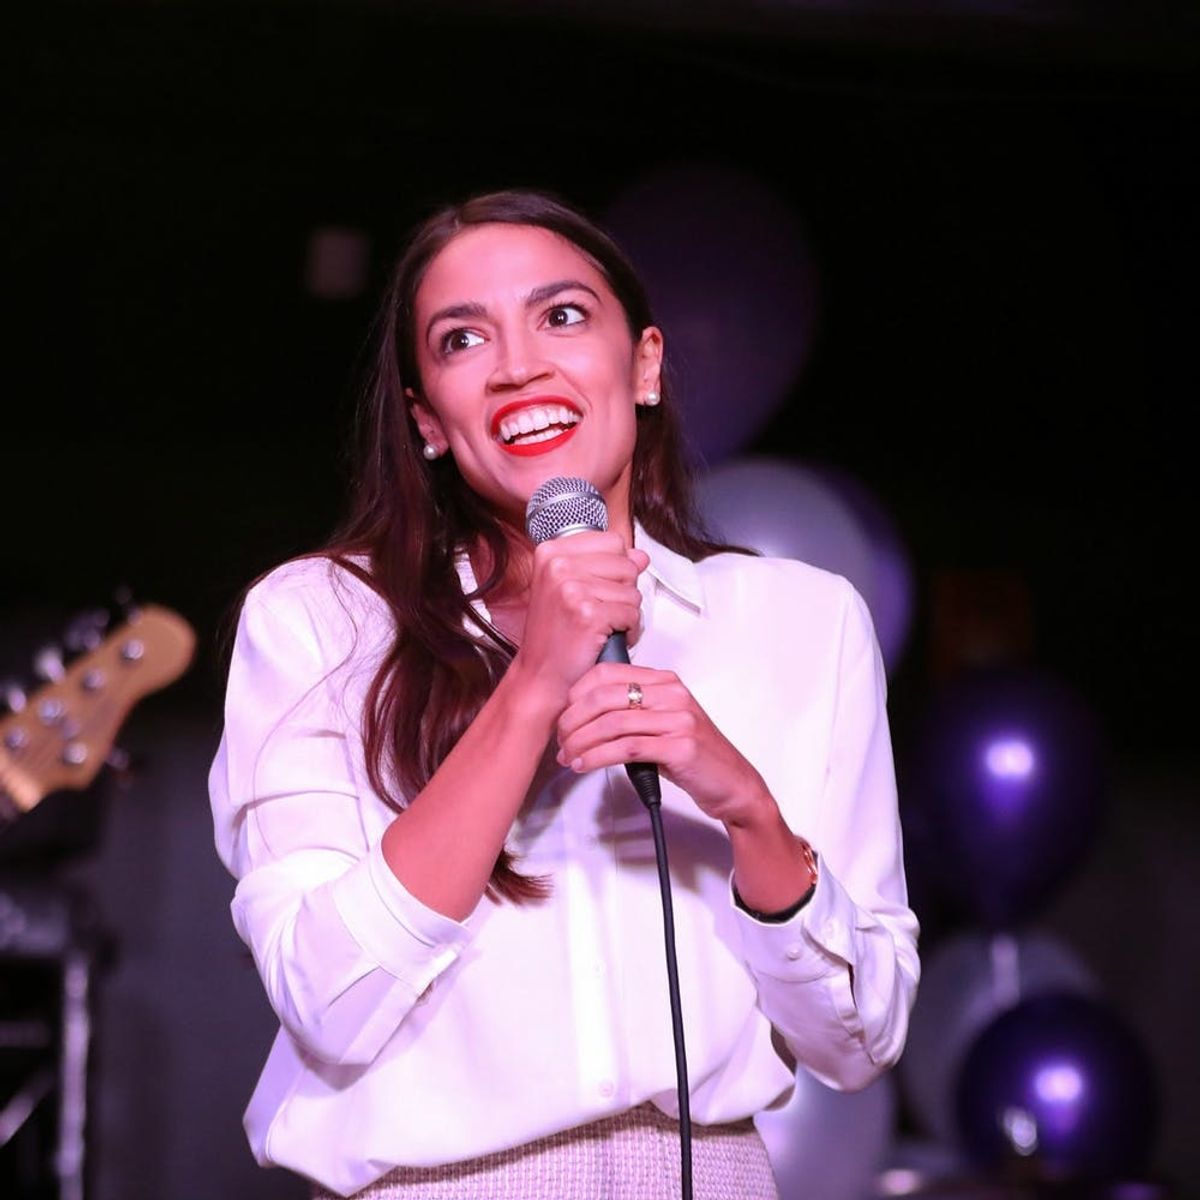 The Point AOC Echoed About Having Kids and Climate Change Is Legit — But Politically Risky